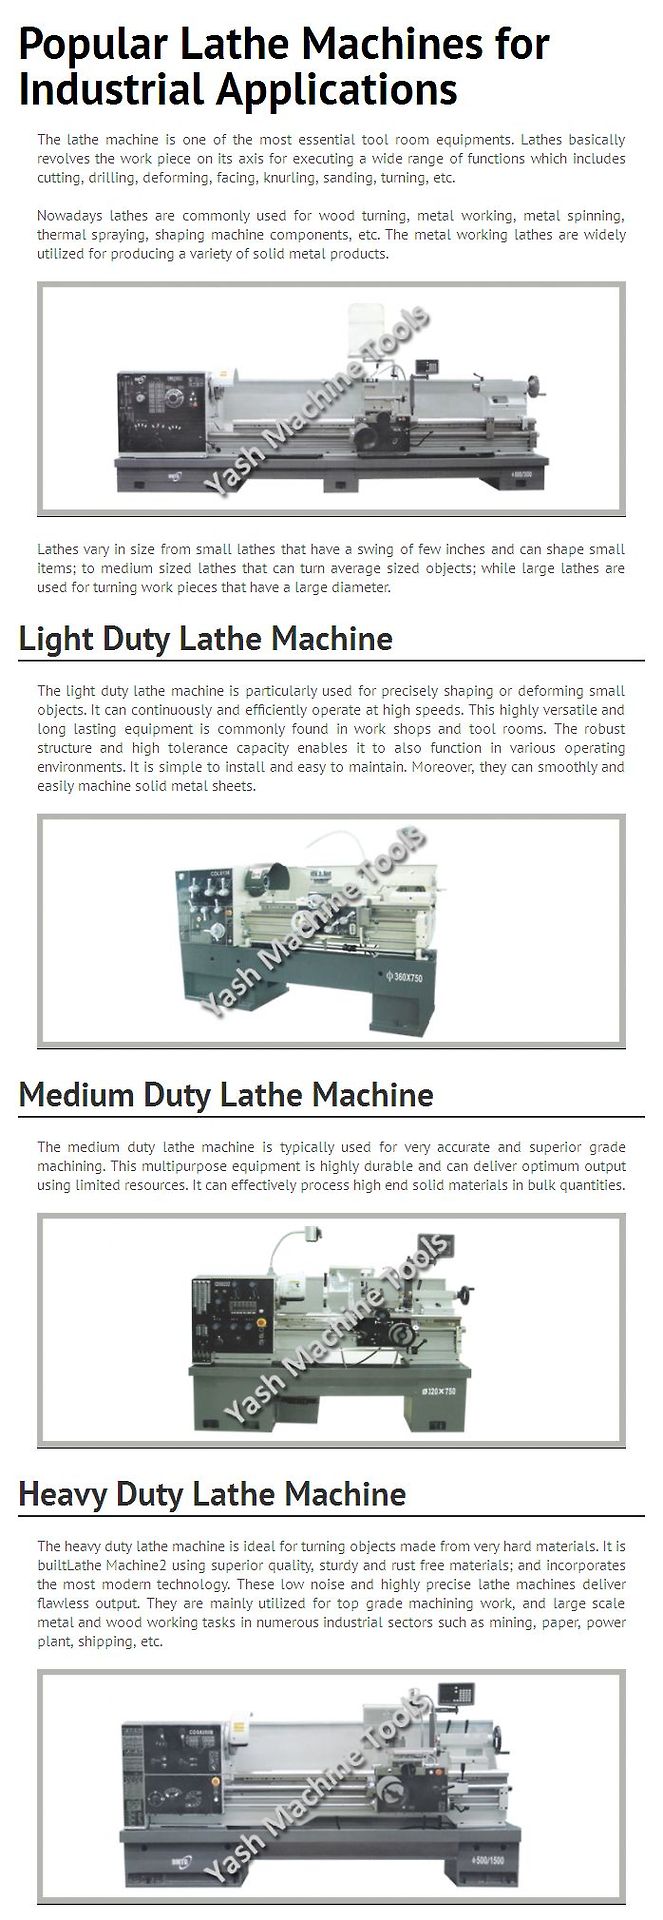 Popular Lathe Machines for Industrial Applications